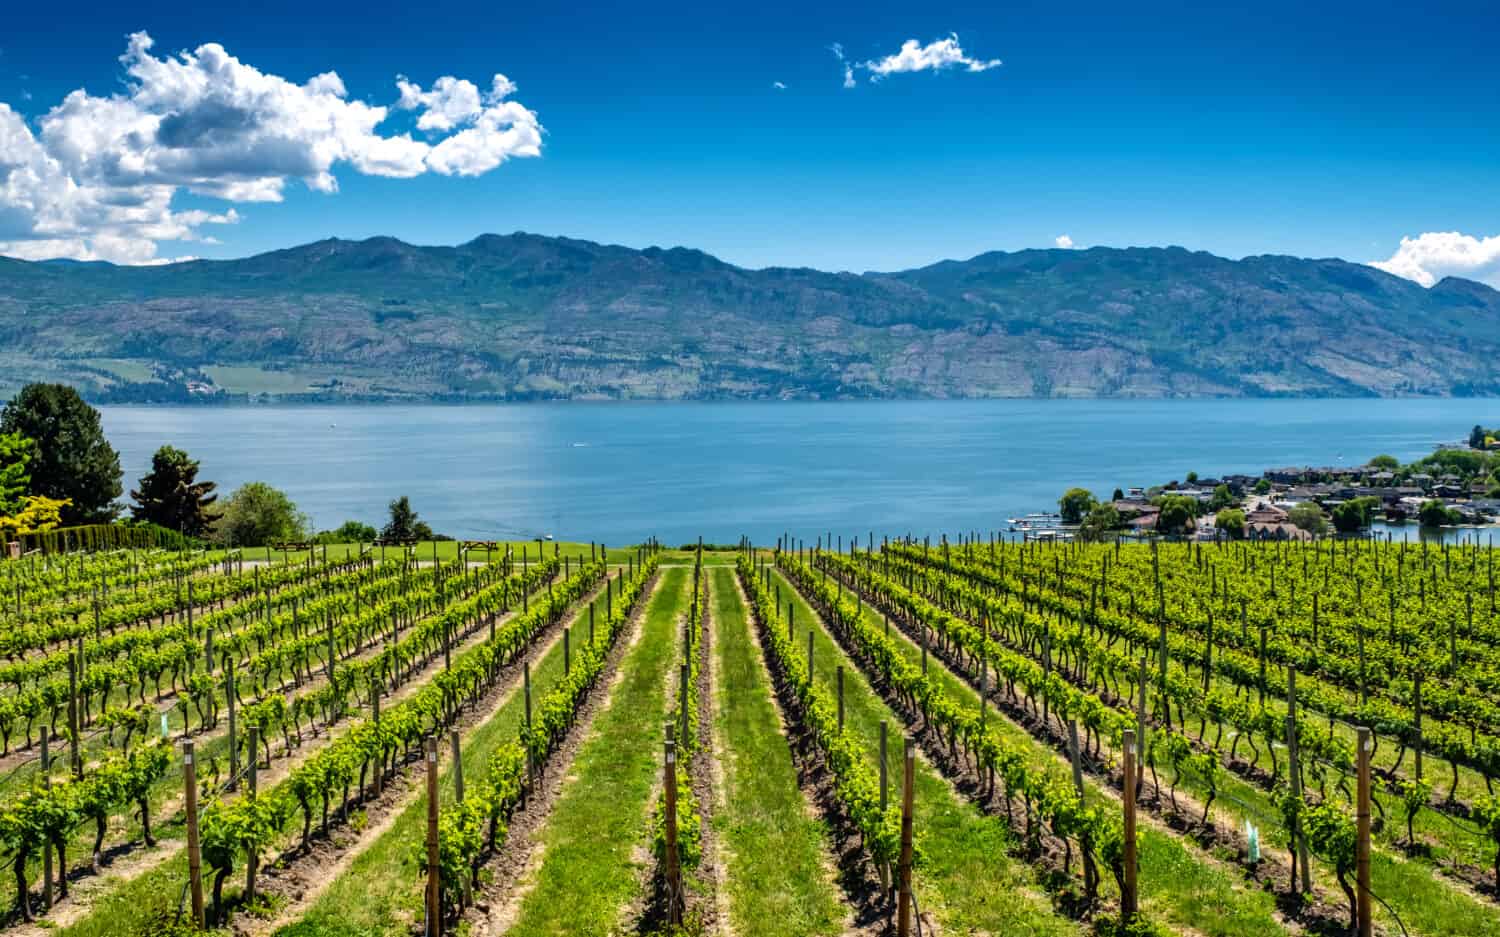 Rows of grapes lead down to the waters near Kelowna, with the Rocky Mountains, blue sky and white clouds in the background.